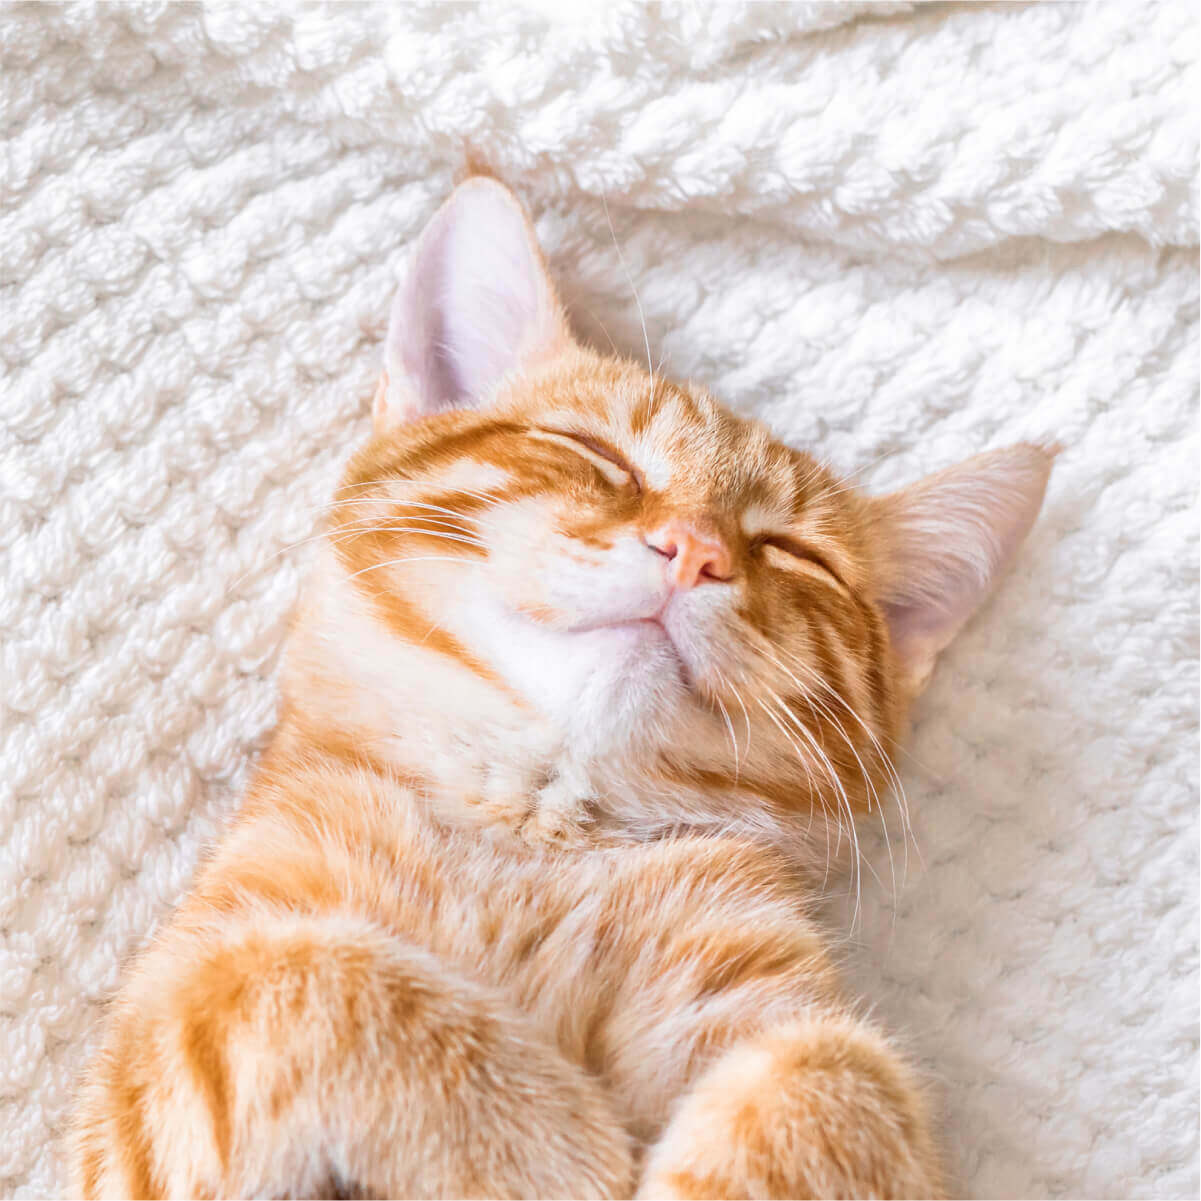 Choices of warm sleeping - A cozy orange tabby cat peacefully dozes off on a soft white blanket, enjoying a peaceful nap.